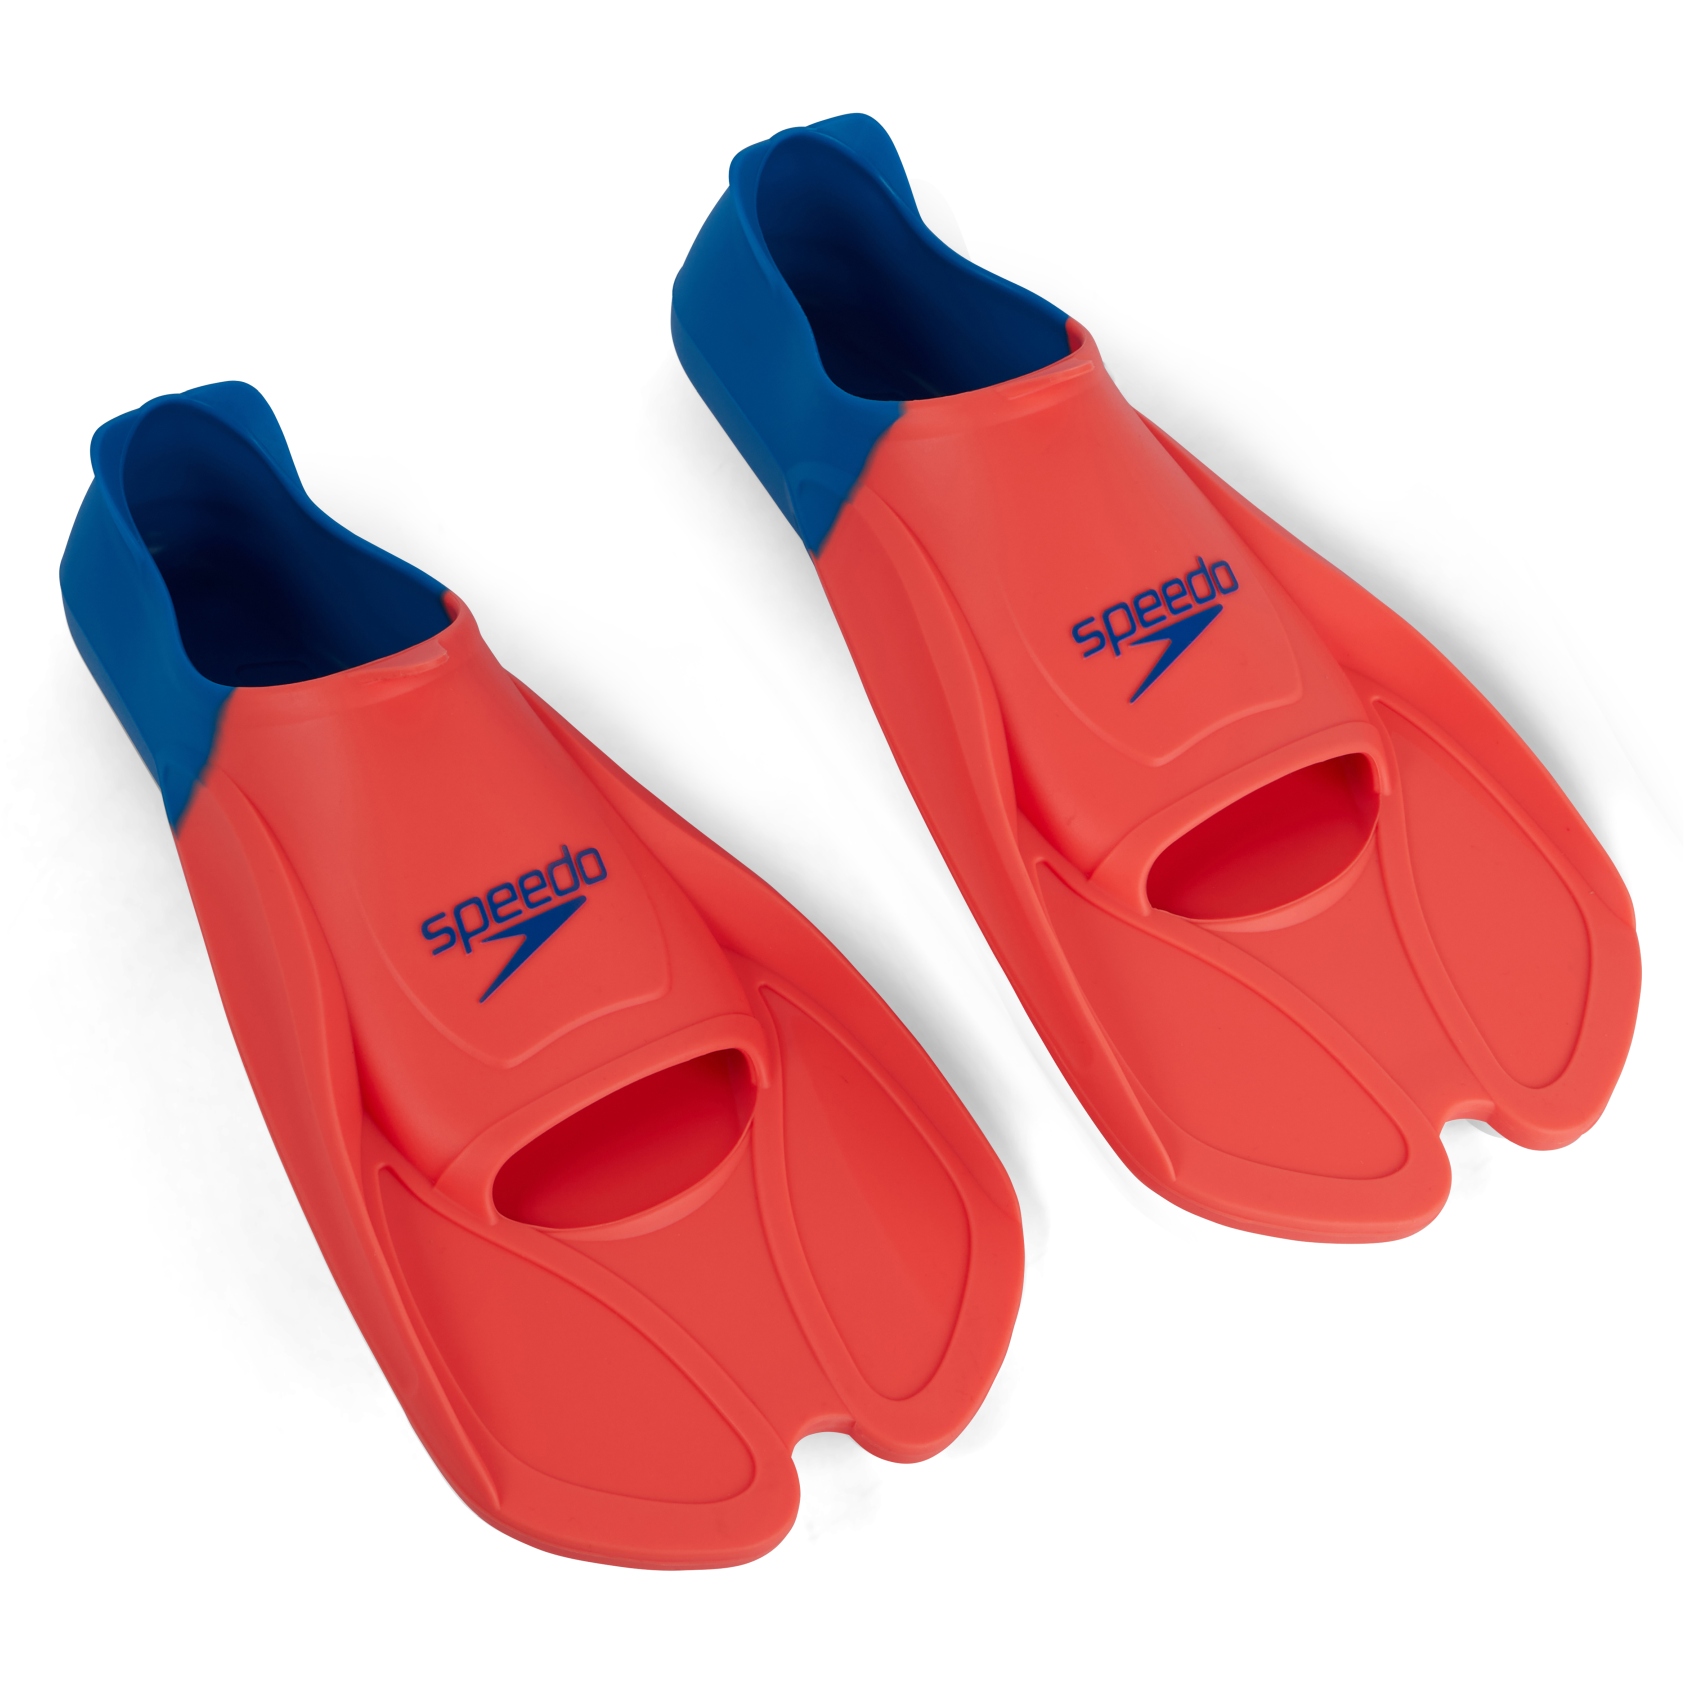 Picture of Speedo Biofuse Training Fin - fluo tangerine/pool blue/blue flame